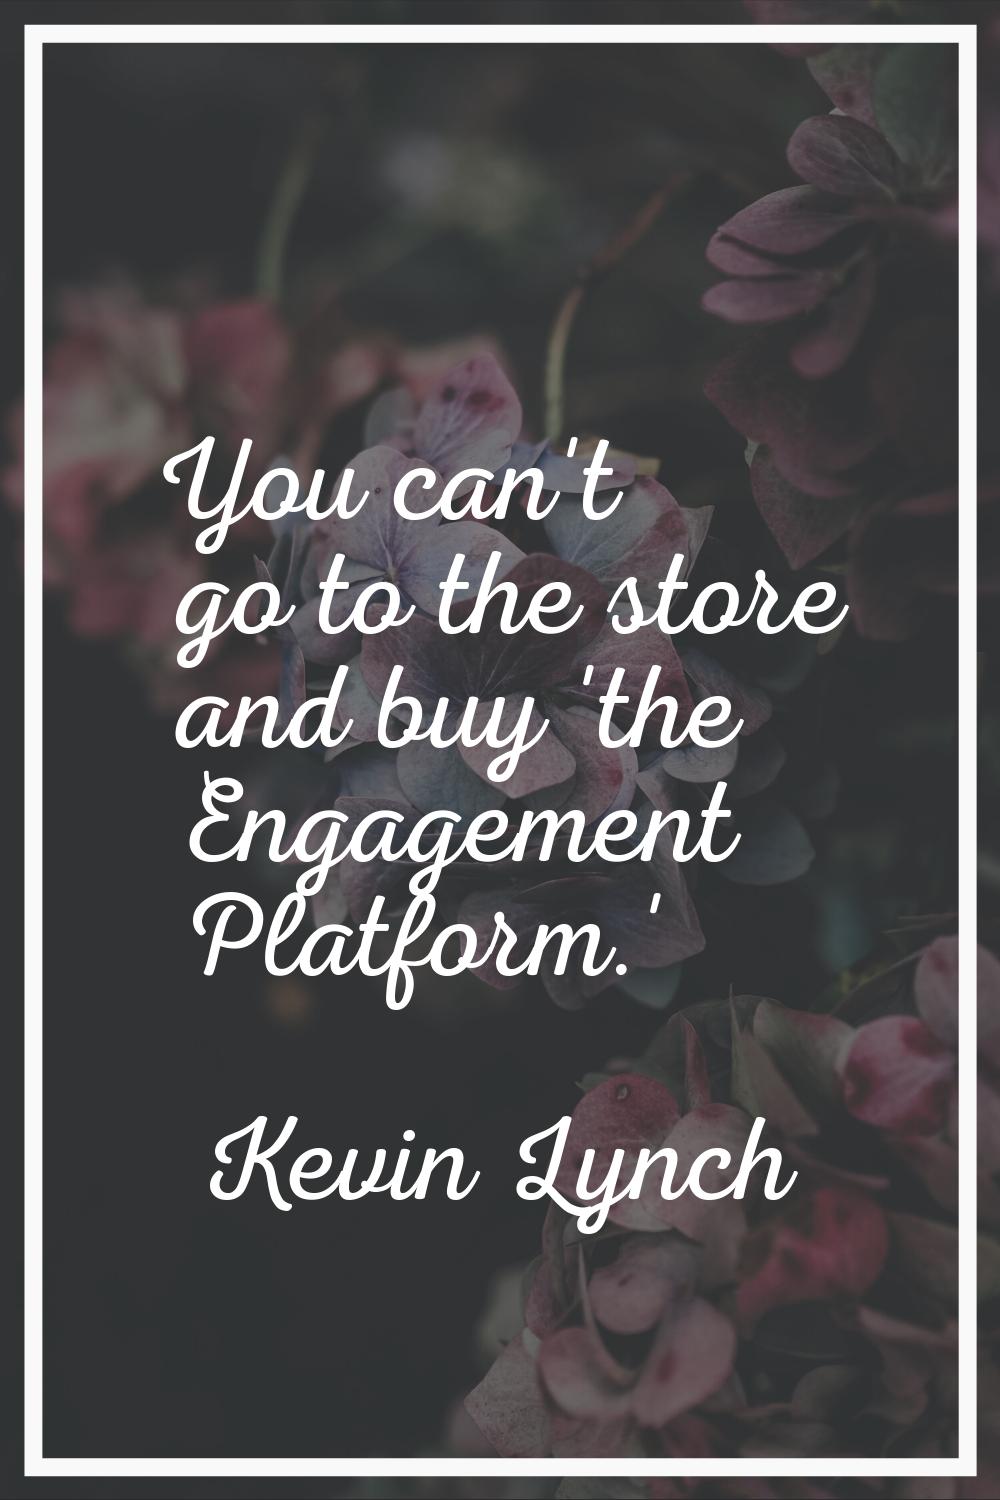 You can't go to the store and buy 'the Engagement Platform.'